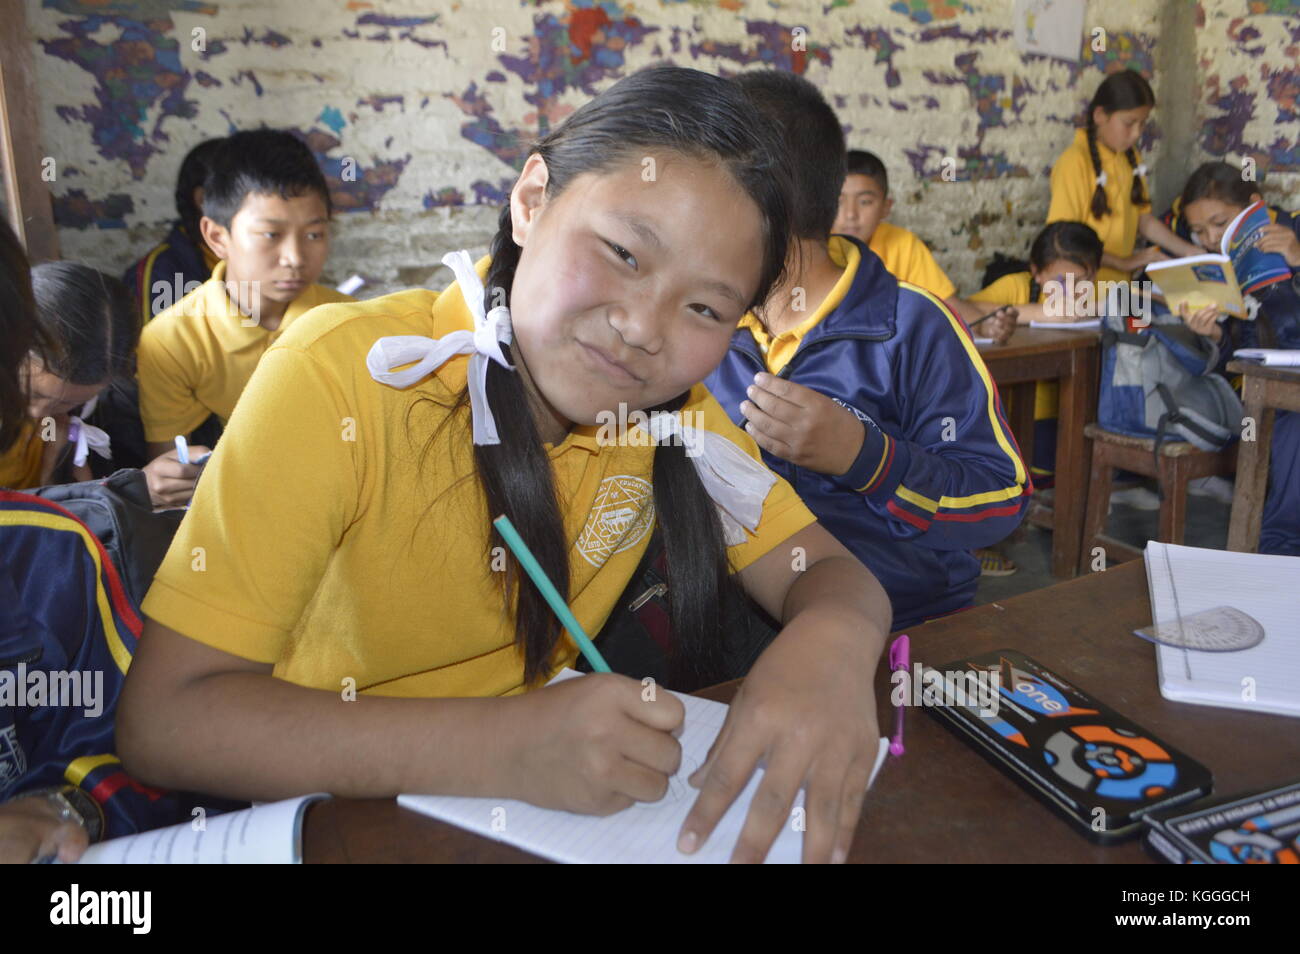 Nepalese teenager with white bows in hair drawing and posing for picture, in background other students, Kathmandu, Nepal. Stock Photo